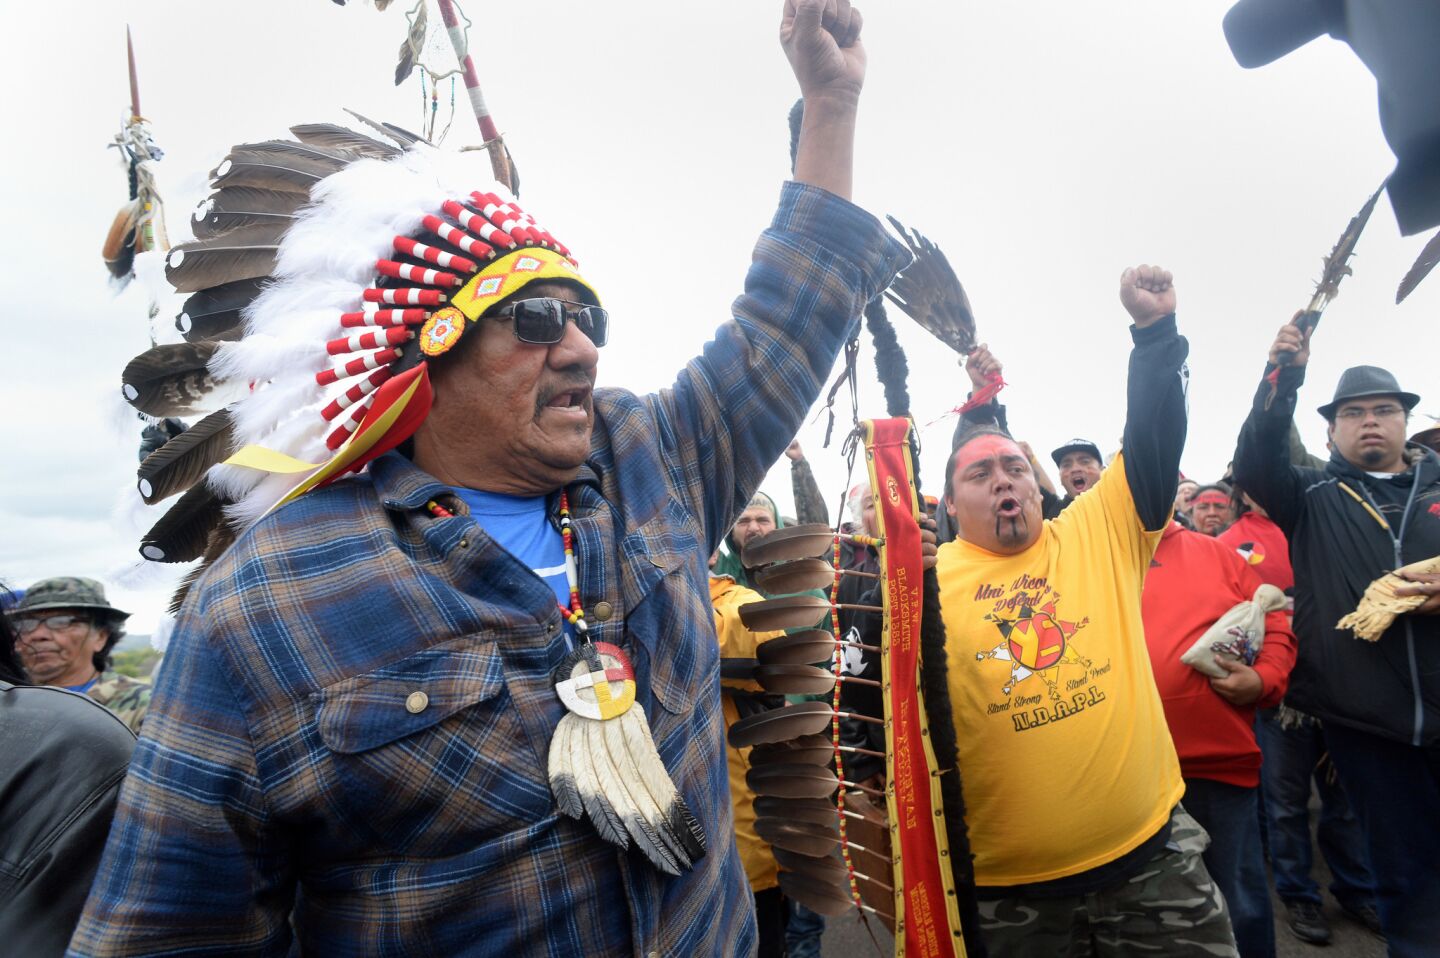 JR American Horse, left, raises his fist with others while leading a march to the Dakota Access Pipeline site in southern Morton County North Dakota on Friday.